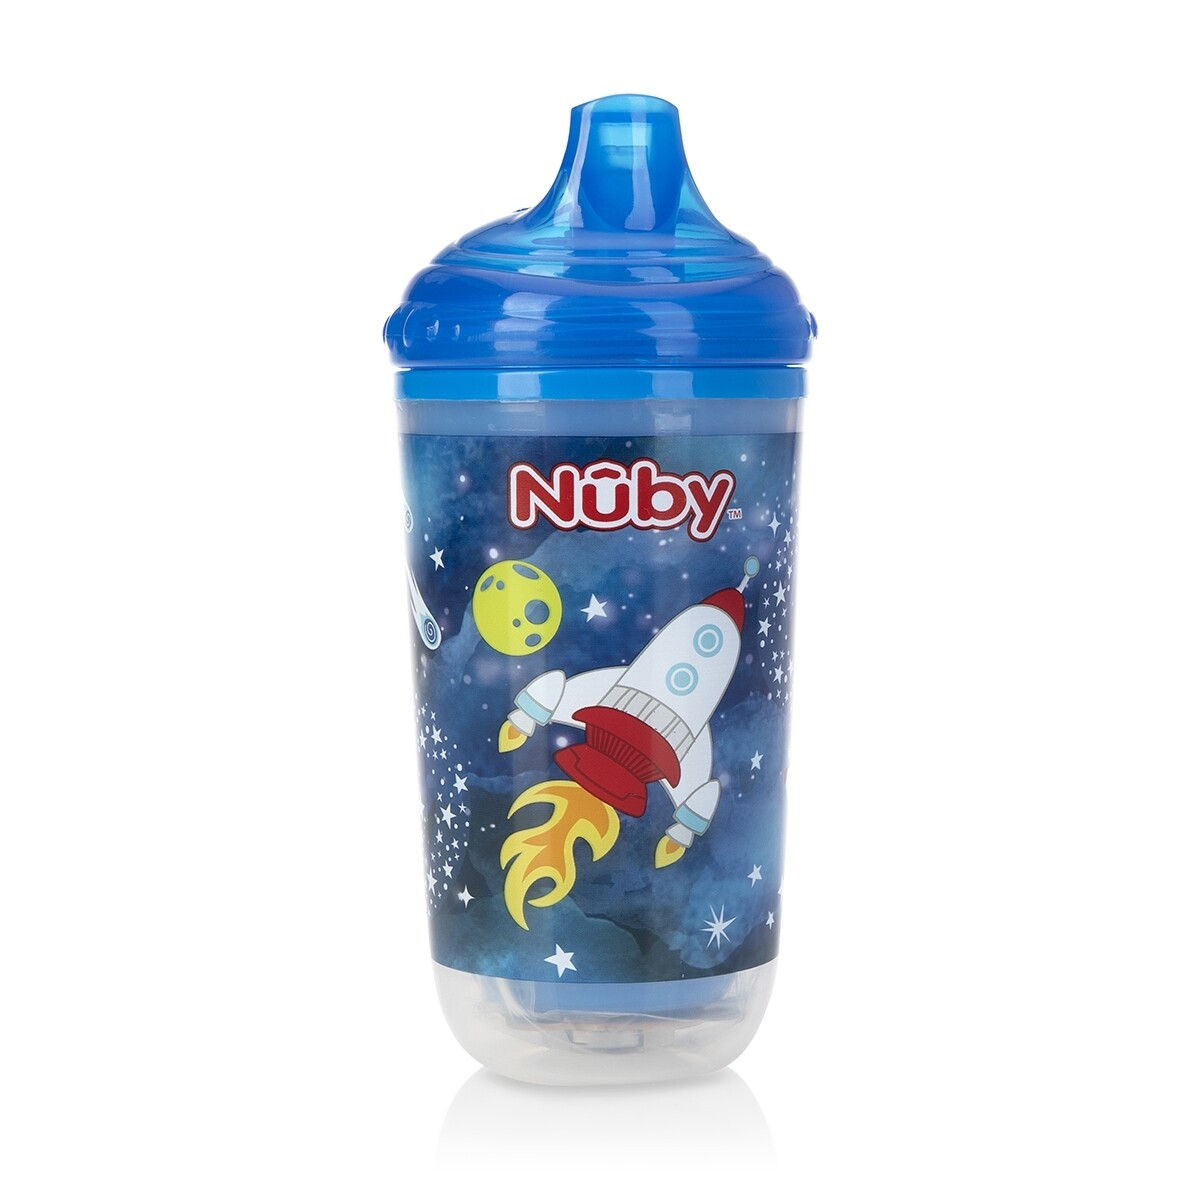 . Case of [24] Nuby? Insulated Light-Up No Spill Sippy Cup - Space, Blue, 10 oz .